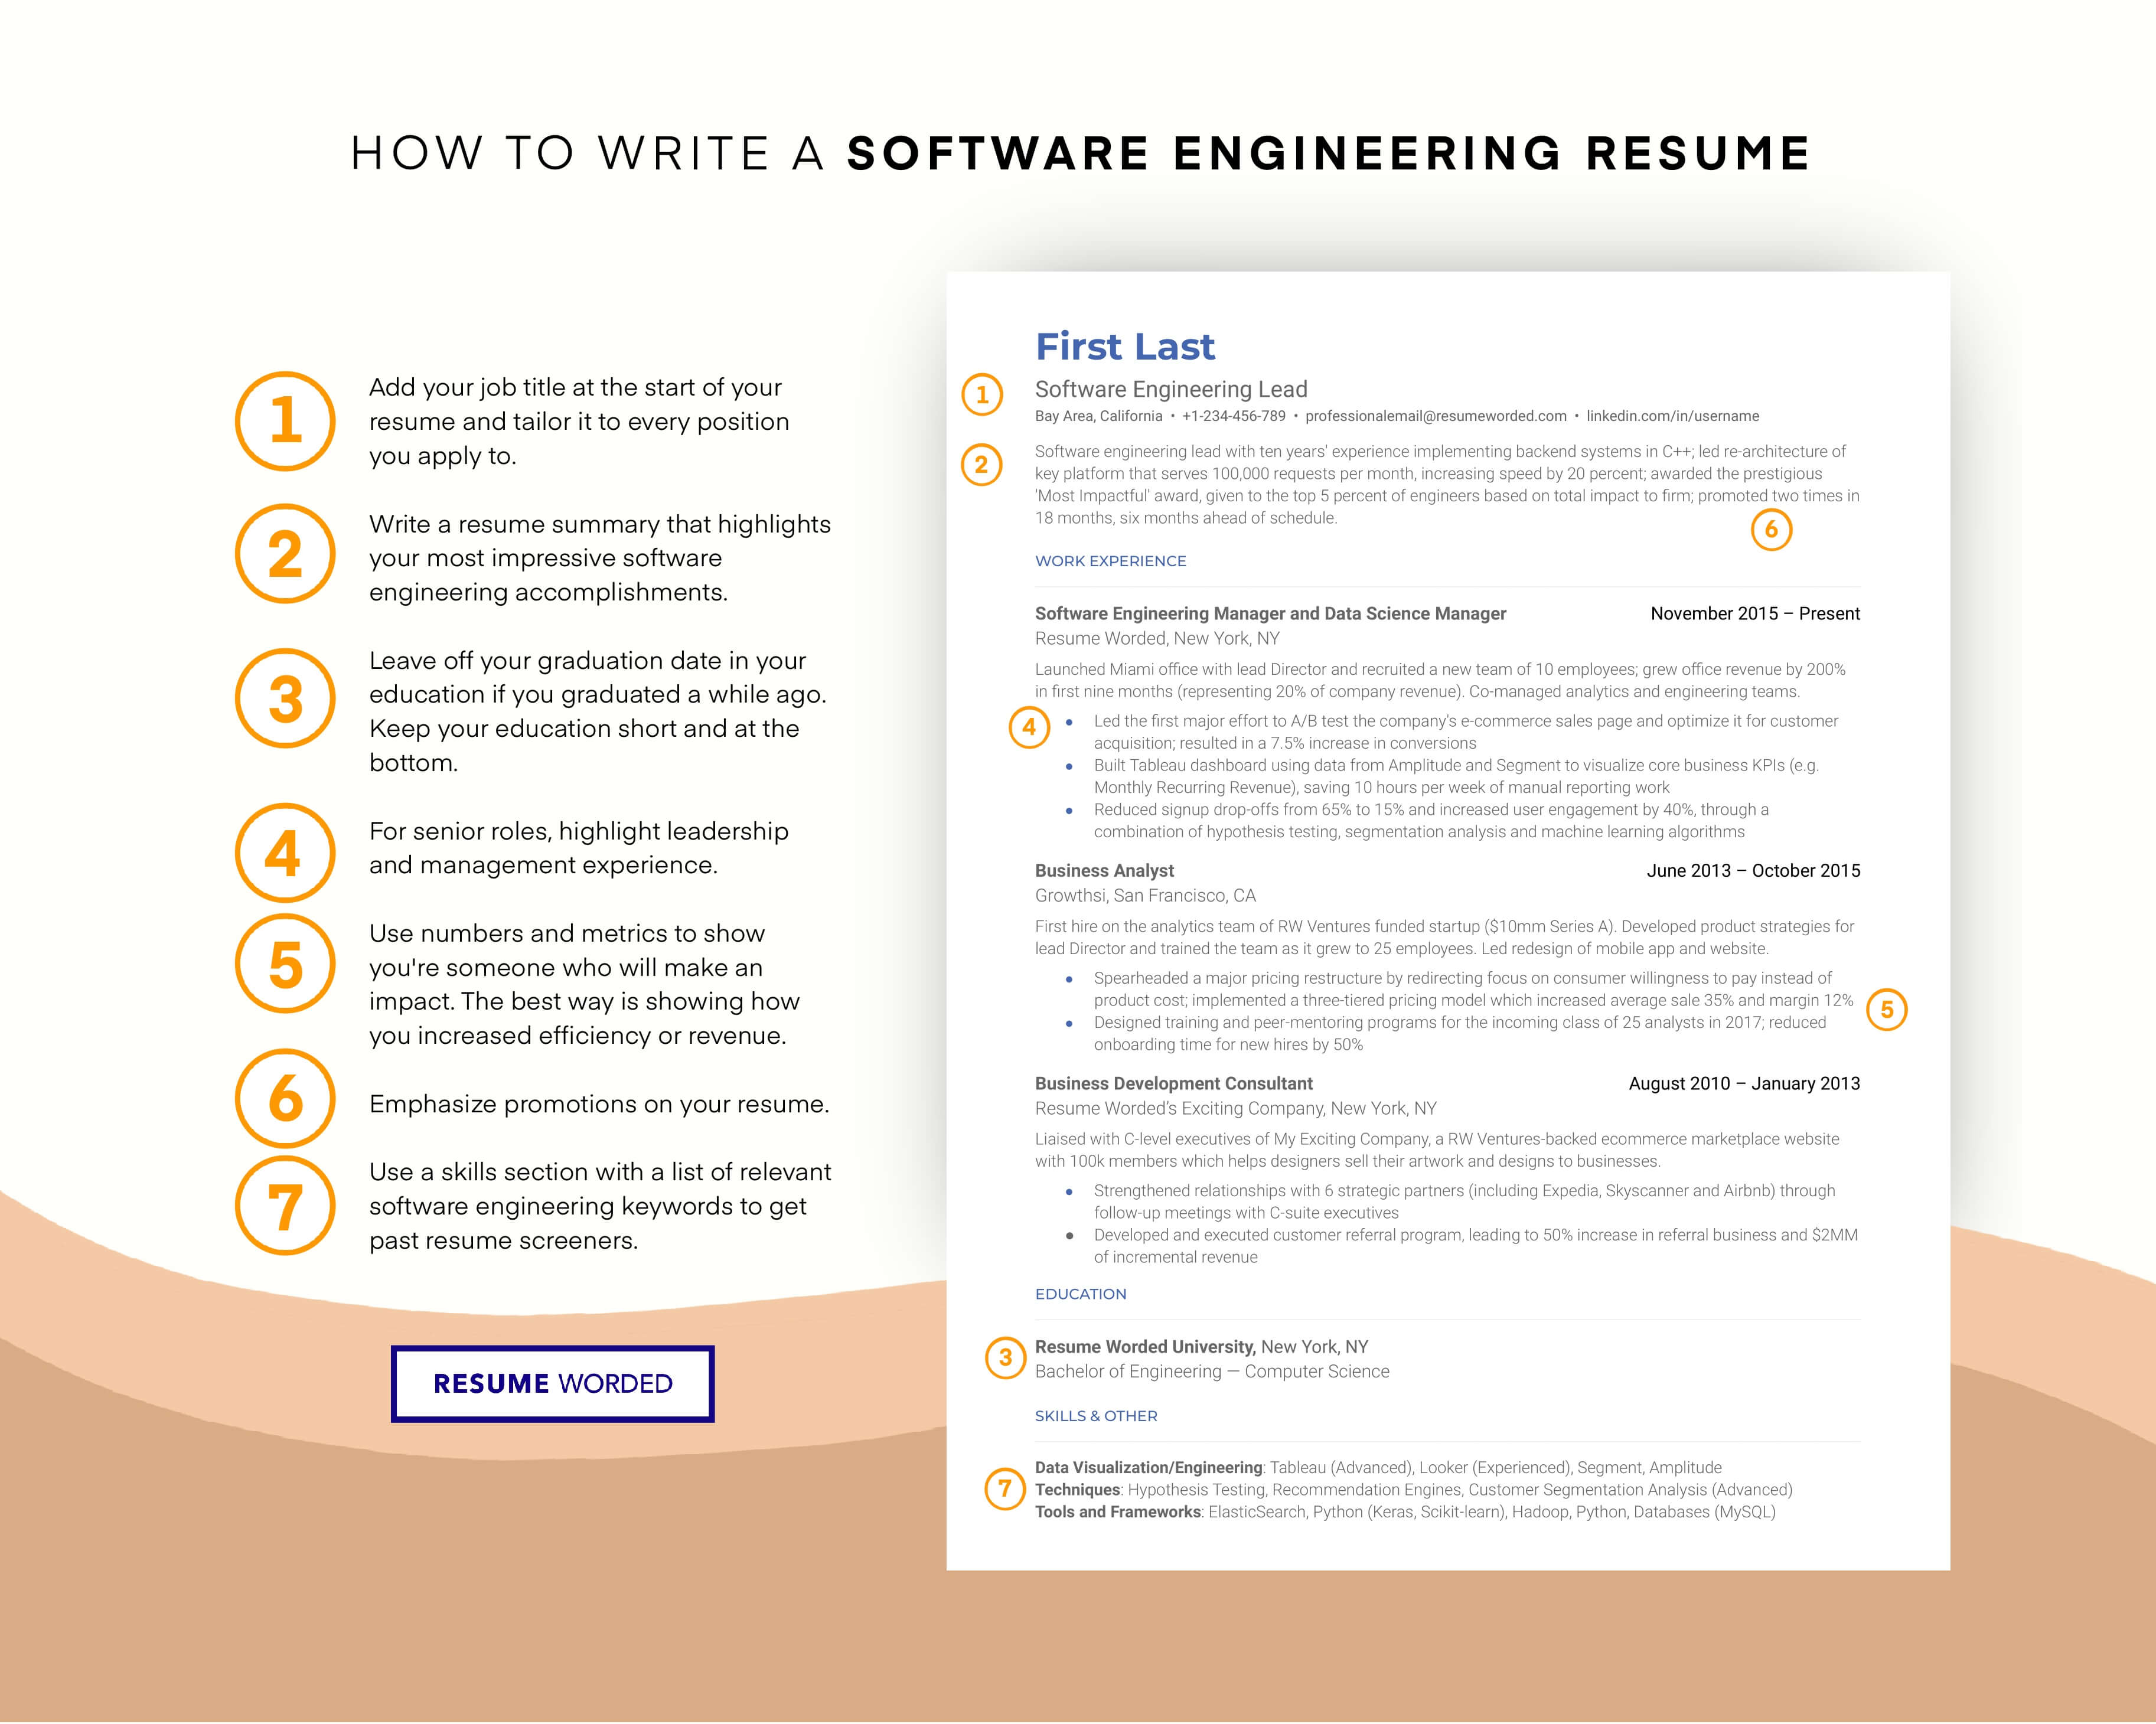 Highlight your ability to build software according to client requirements - Software Engineer Resume